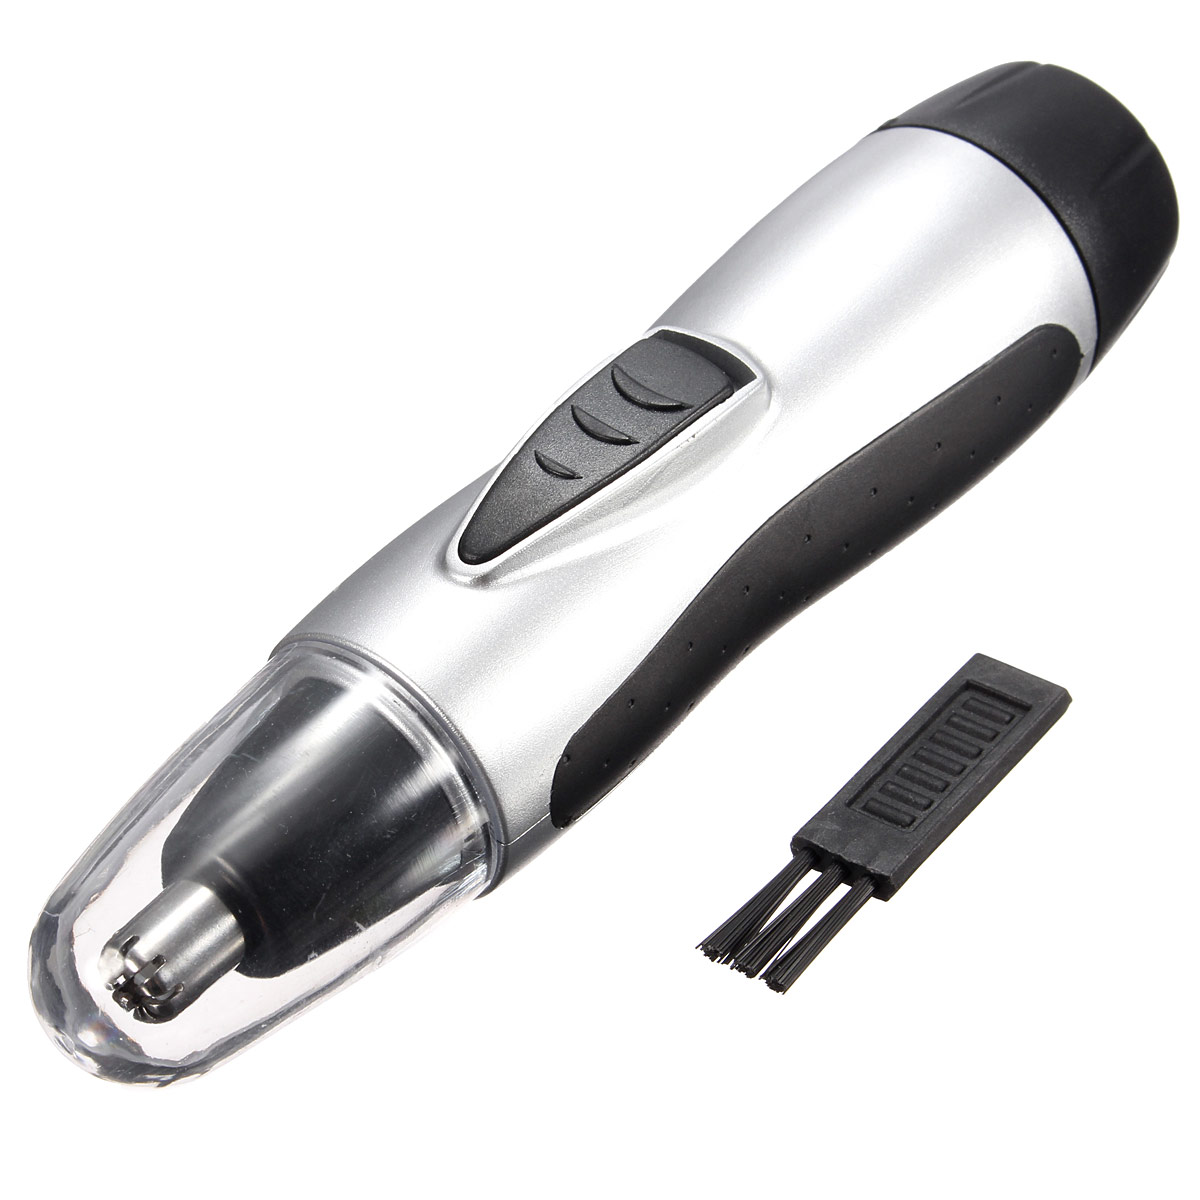 

Electric Nose Ear Face Hair Trimmer Remover Shaver Clipper Cleaner